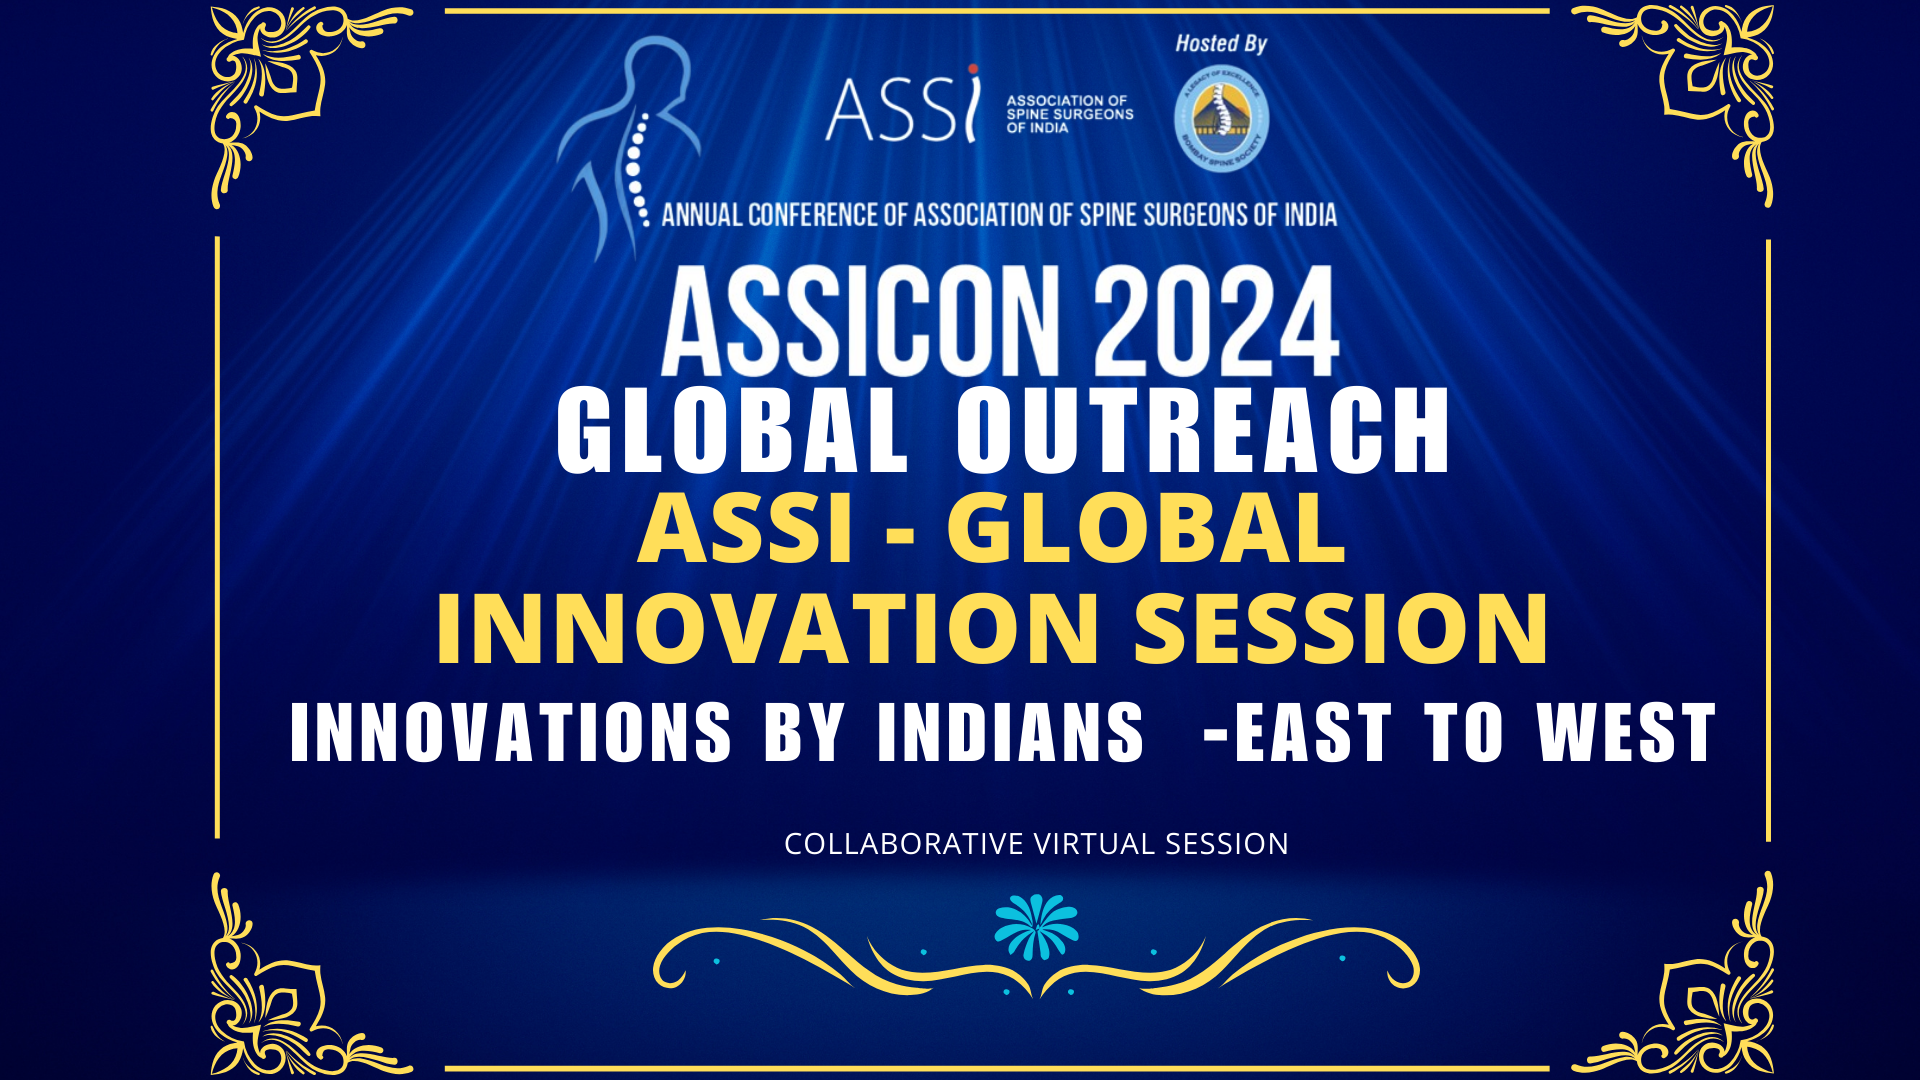 ASSICON 2024 GLOBAL OUTREACH: ASSI-GLOBAL Innovations by Indians -East to west 